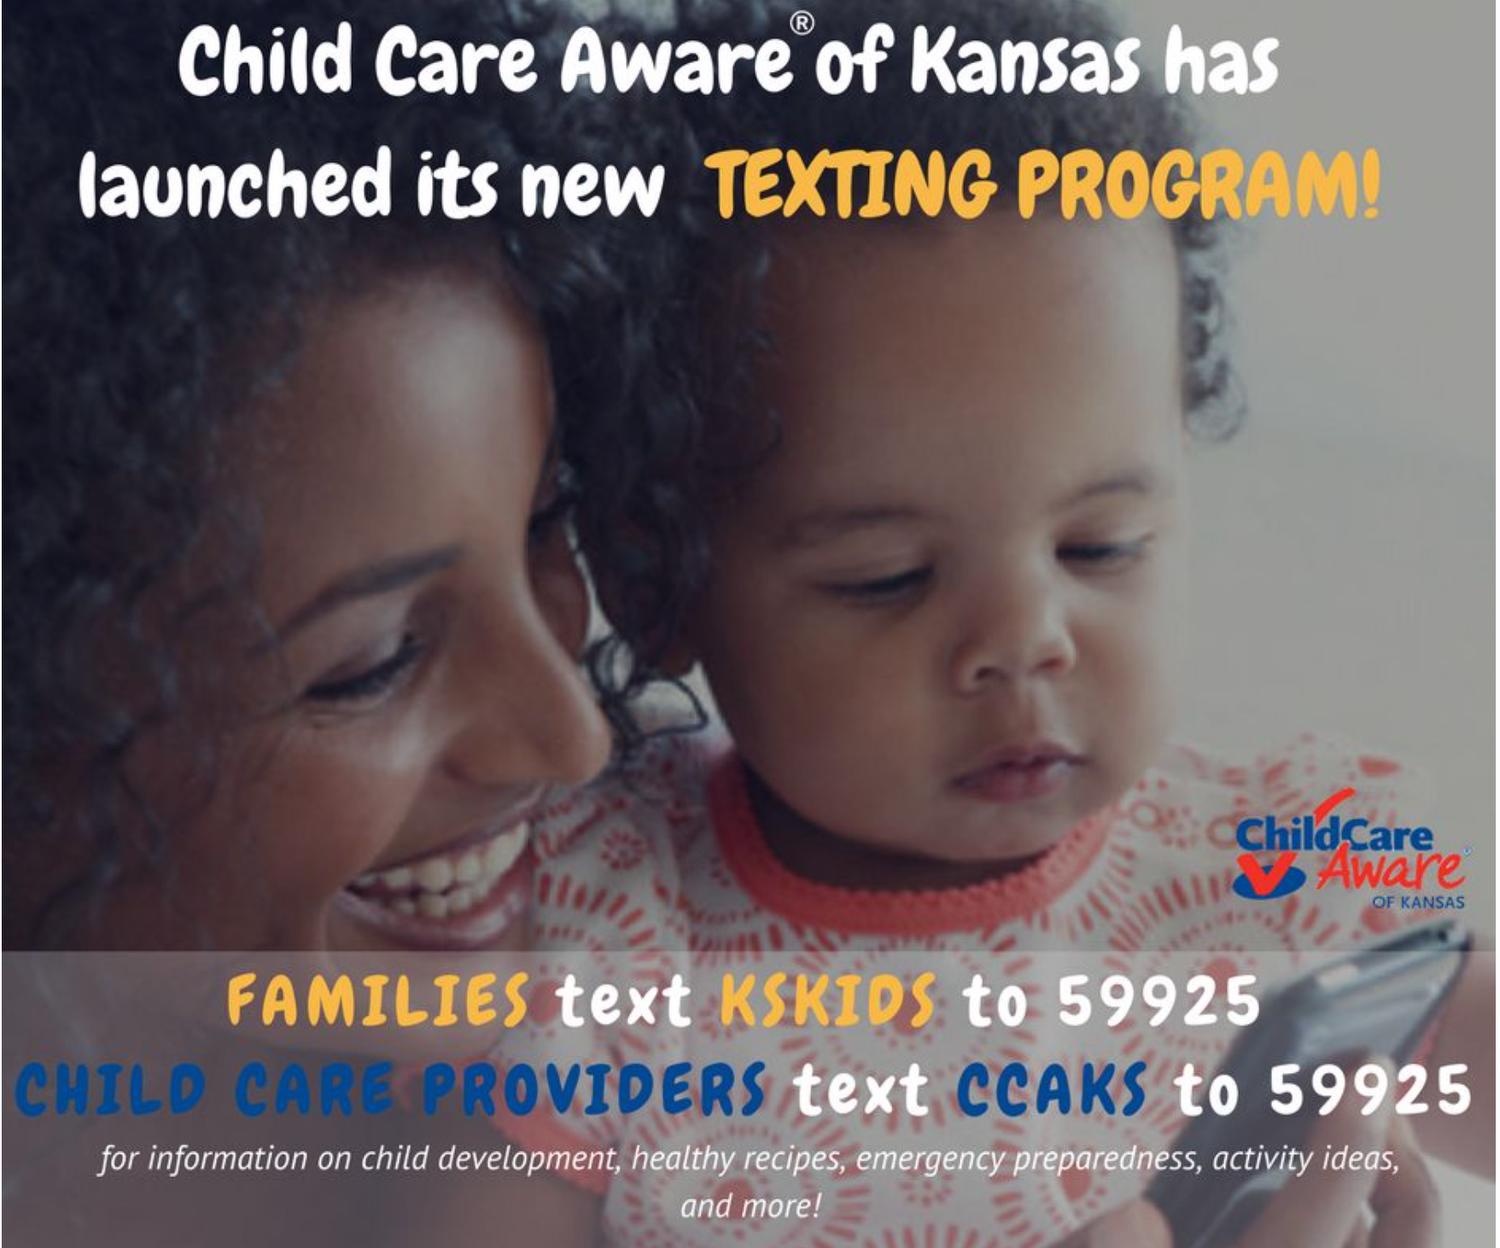 Graphic of a mother and a young child with text reading, " Child Care Aware of Kansas has launched its new texting program!"